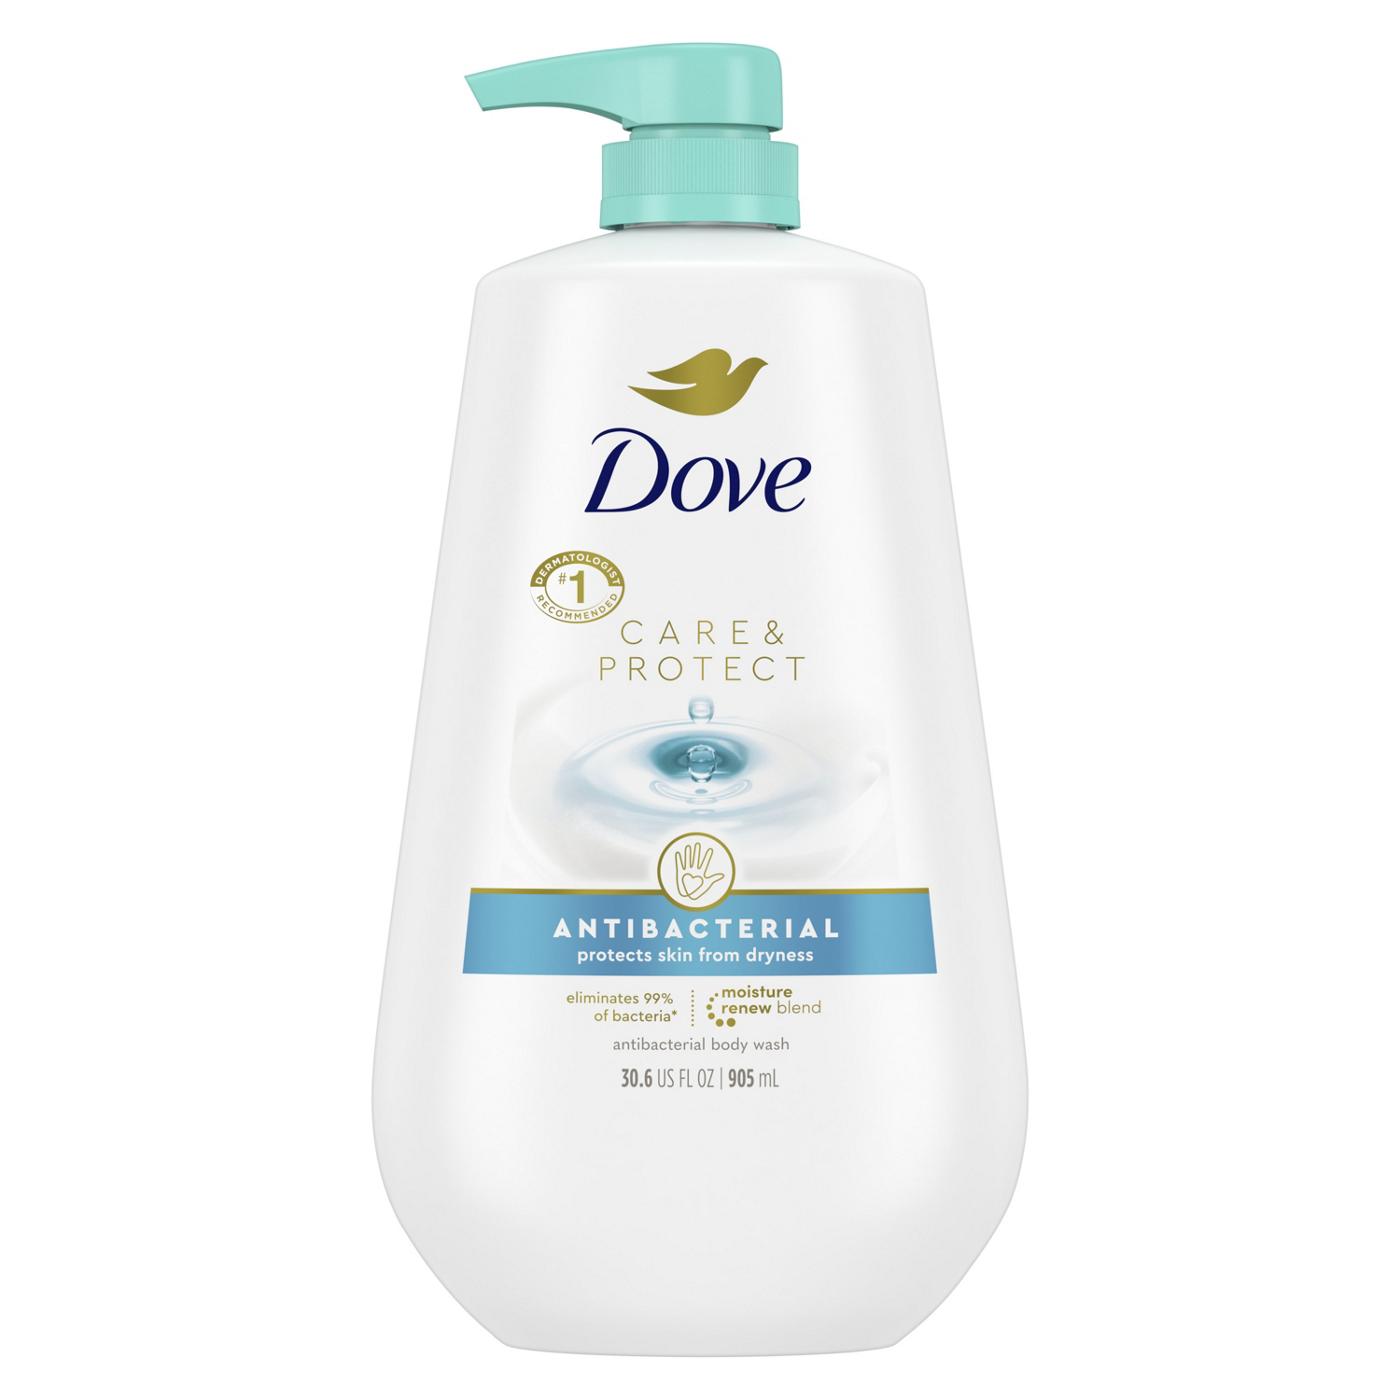 Dove Care & Protect Antibacterial Body Wash; image 1 of 8